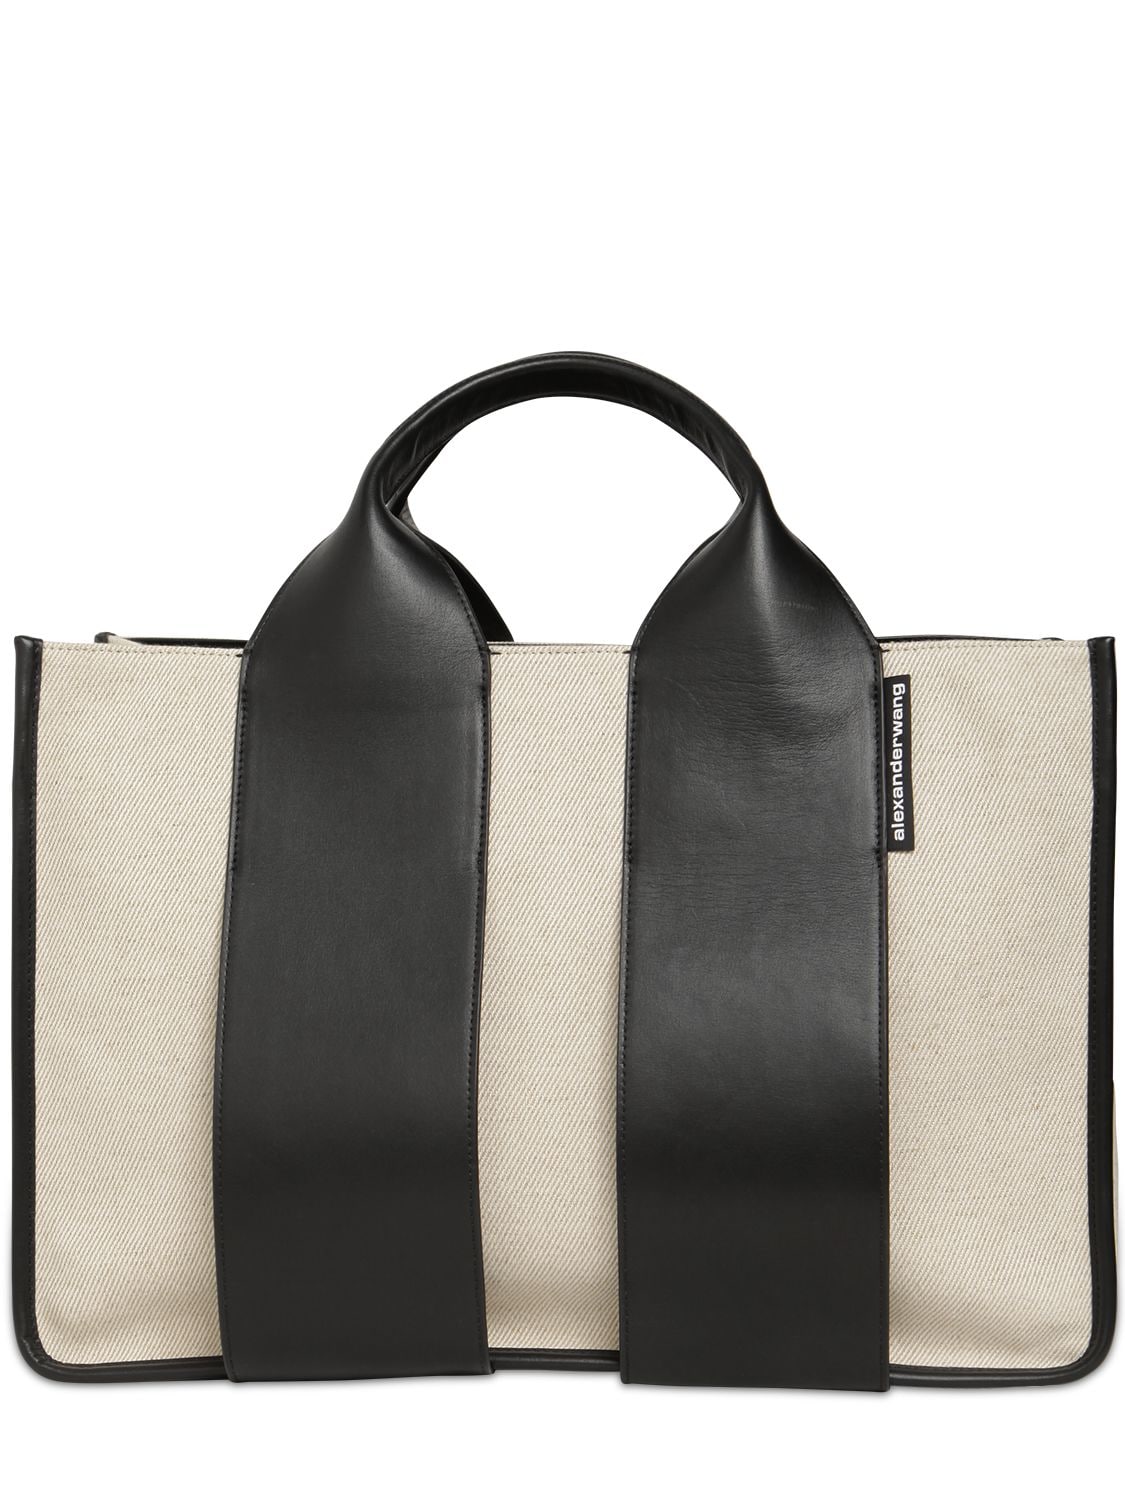 Alexander Wang Large Rocco Leather-trimmed Canvas Satchel In White/silver